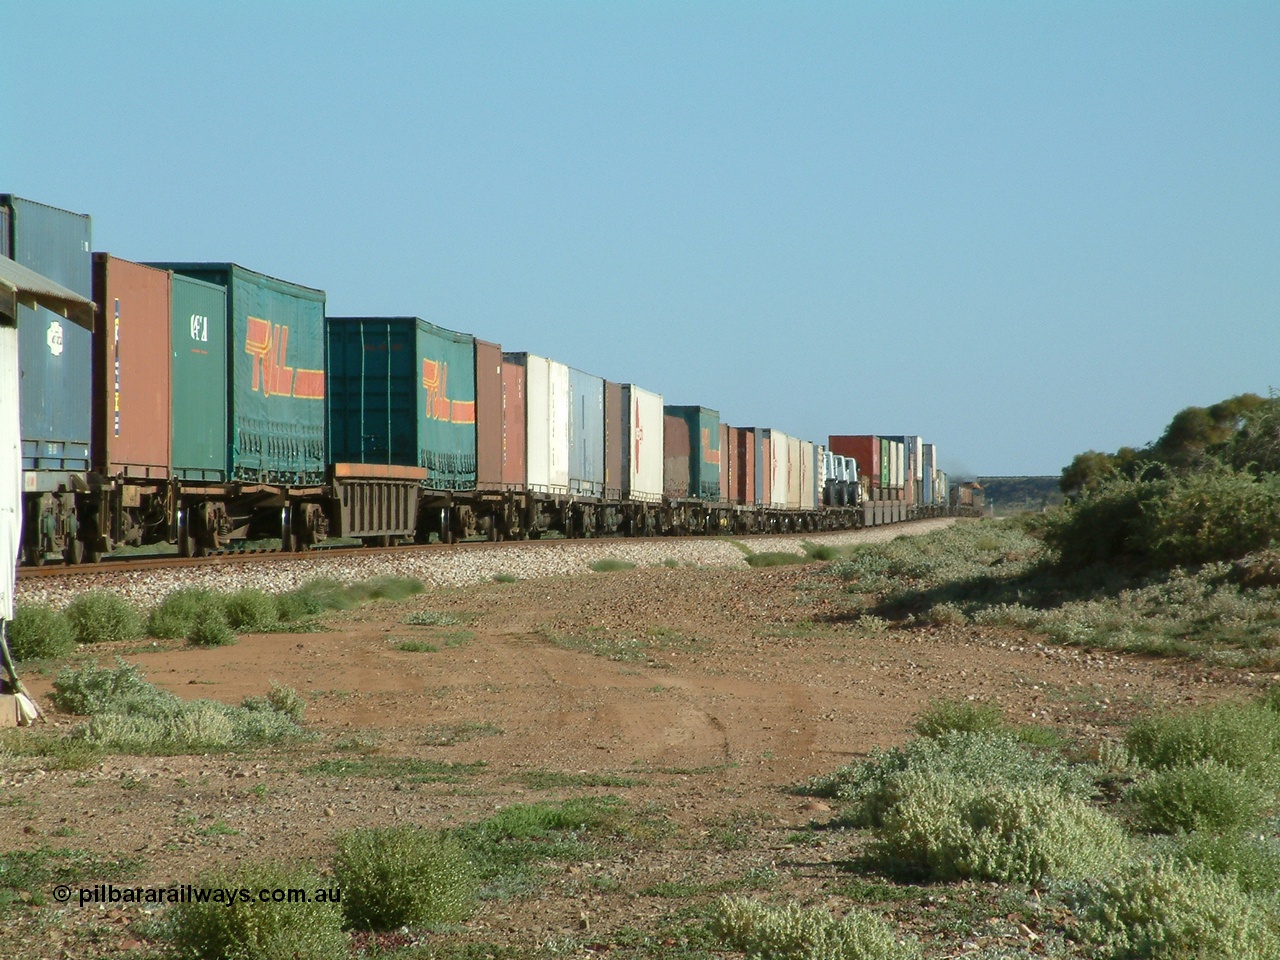 030404 082917
Port Germein, Perth bound steel and intermodal hurries through on the main behind National Rail's NR class units, showing one and a half stacking and new vehicles on flat waggons. 4th April 2003.
